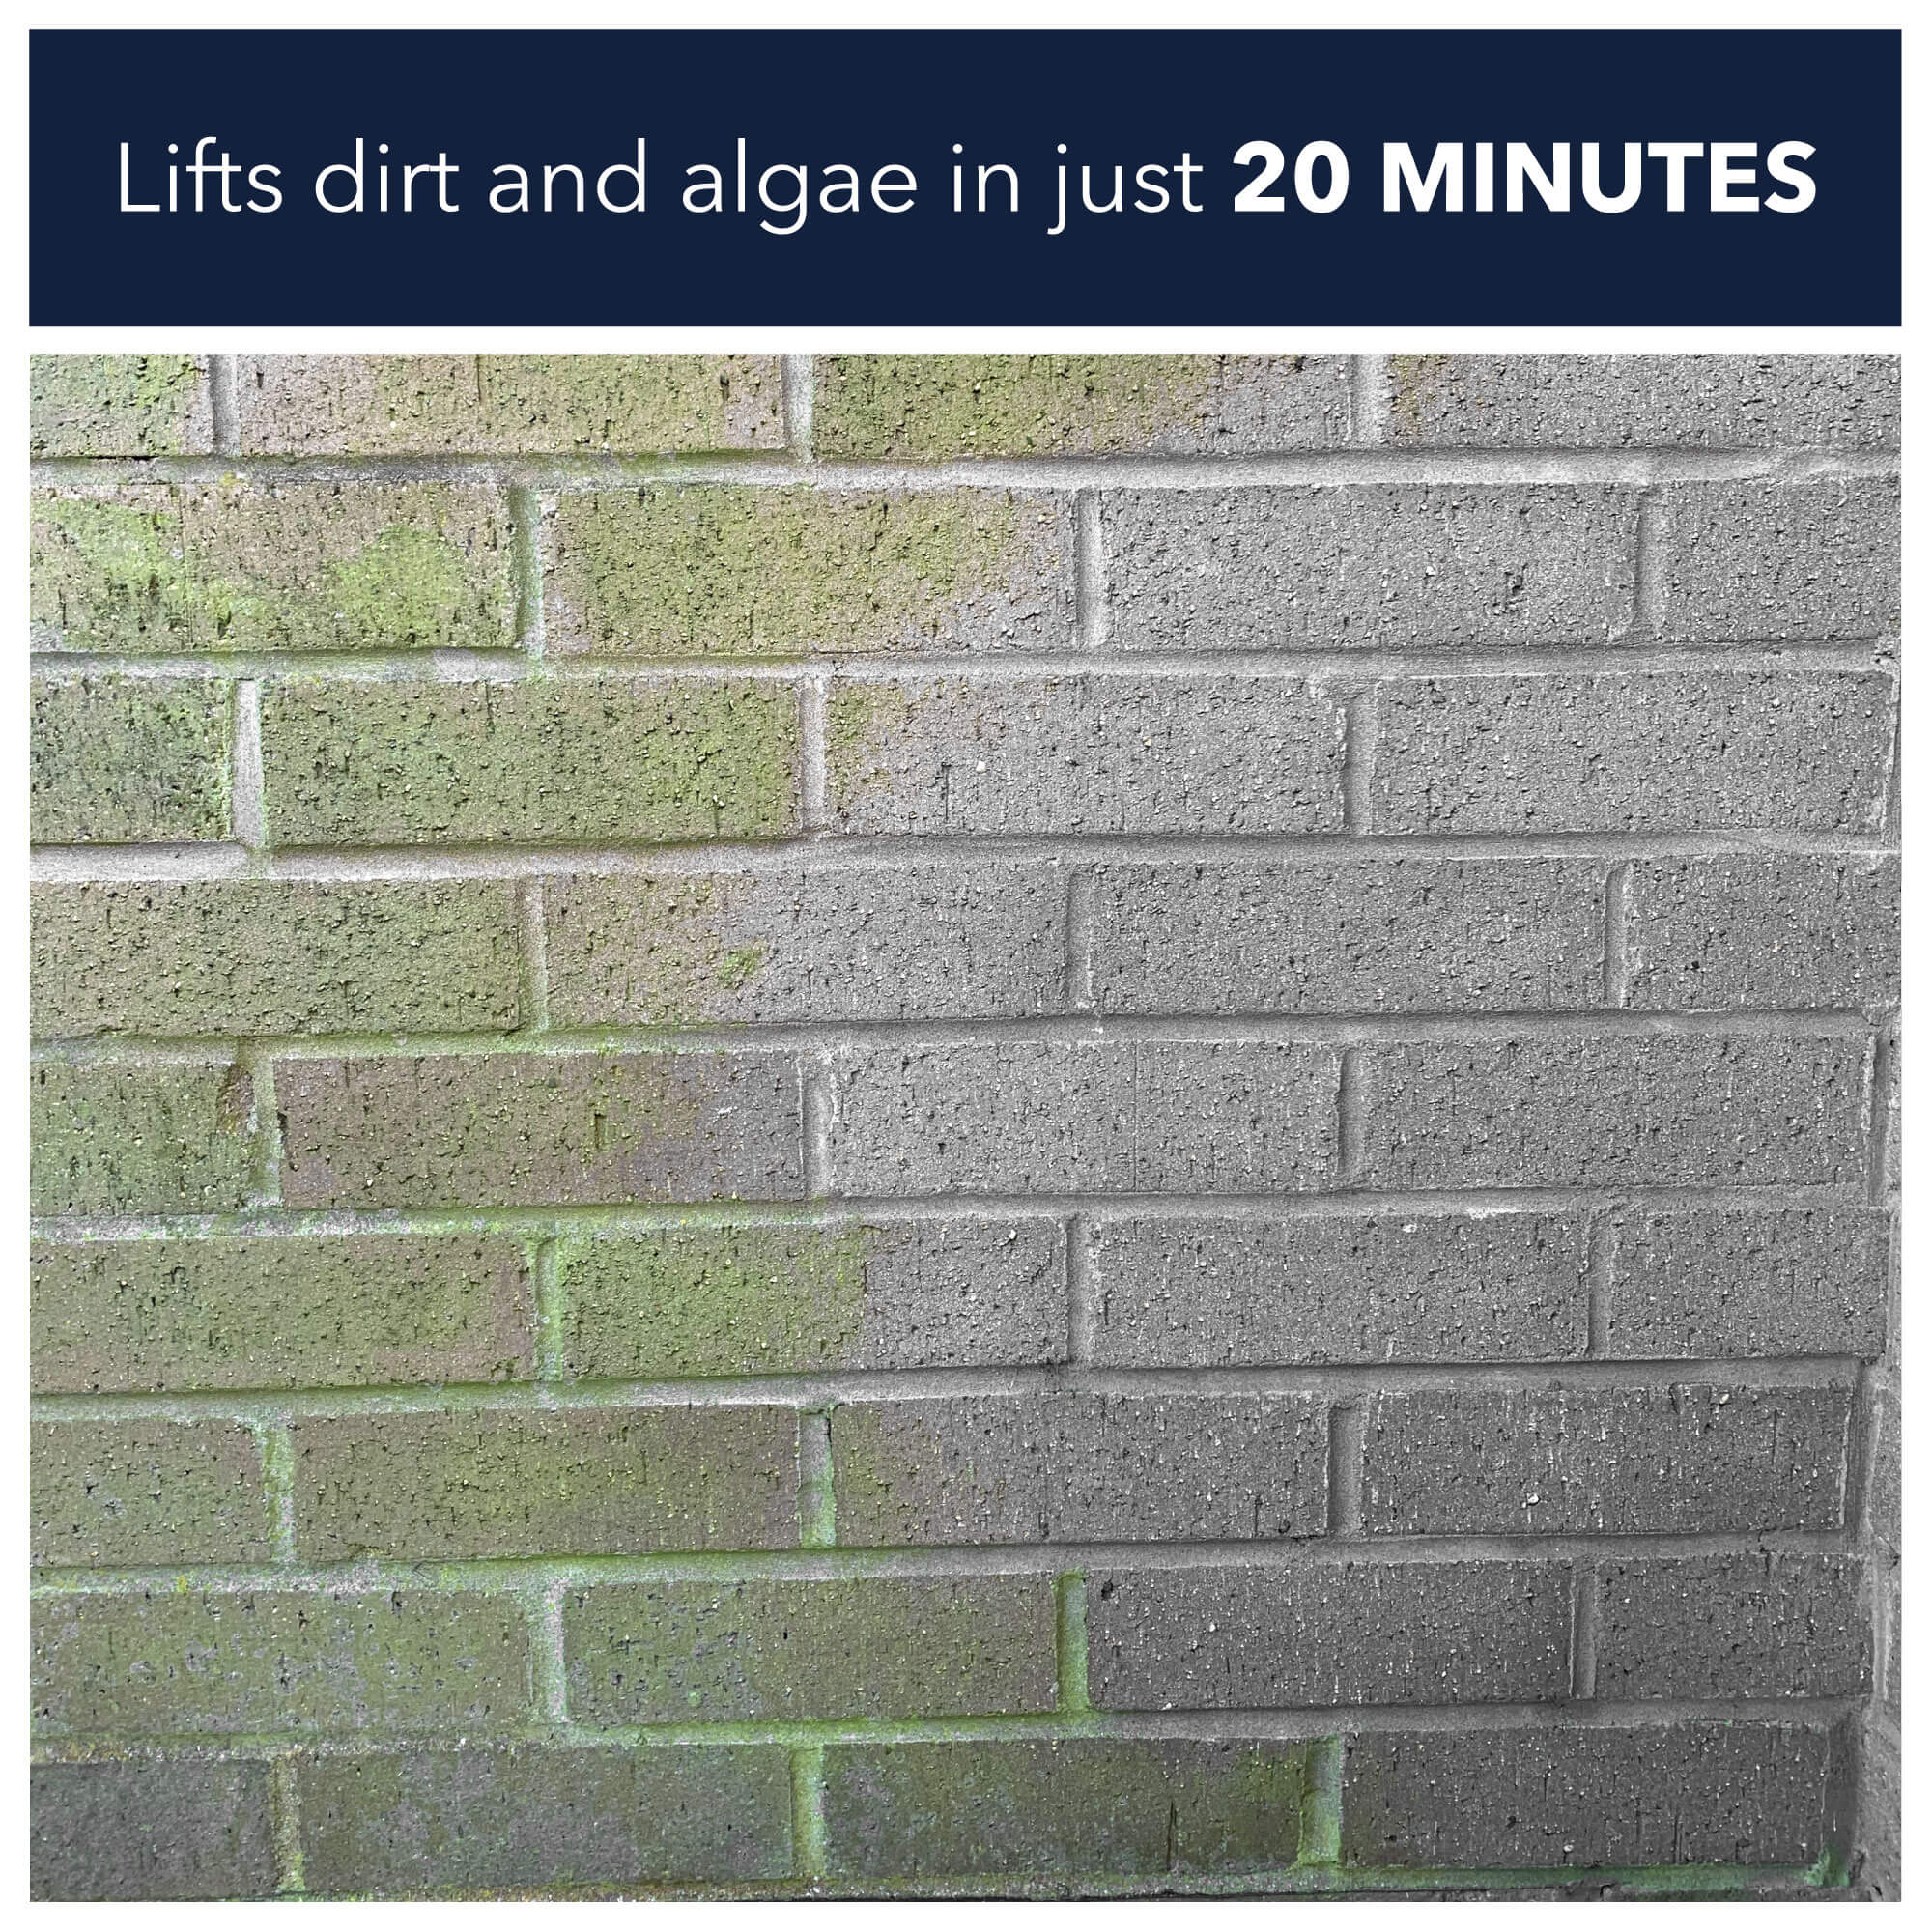 Lifts dirt and algae in just 20 minutes